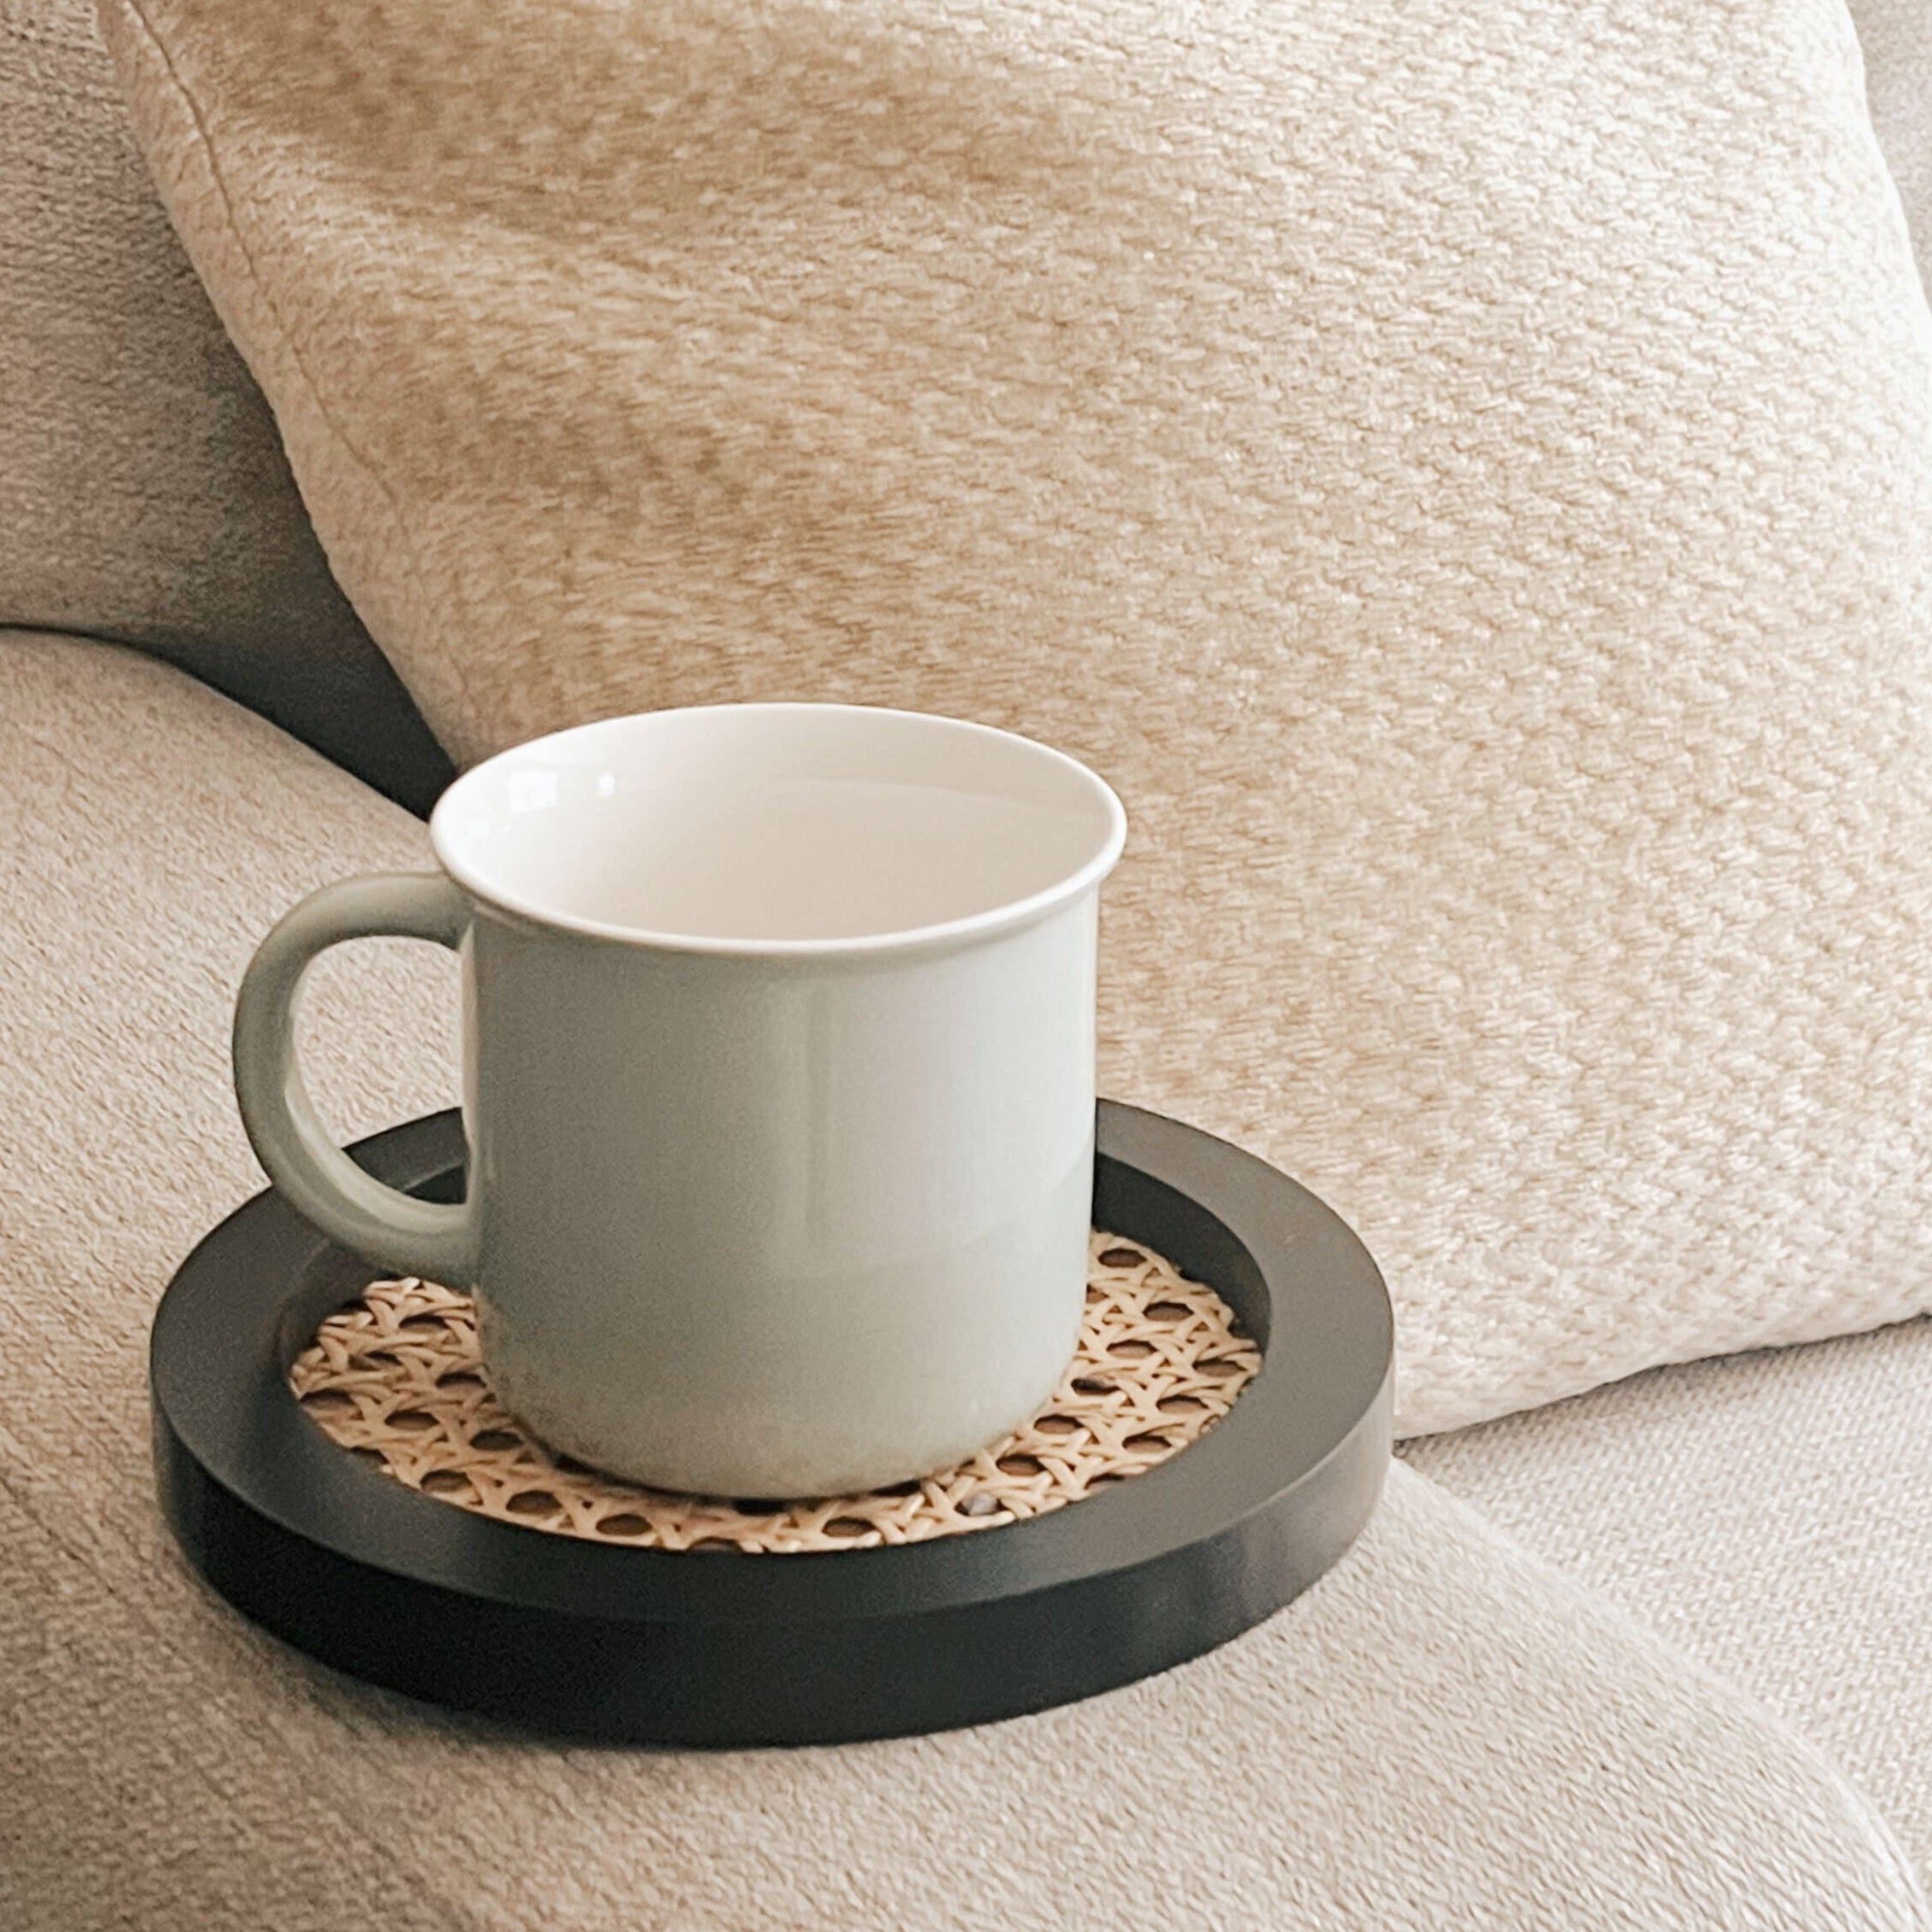 A black rattan cane tray holding a grey ceramic mug on the armrest of an oatmeal colored couch.